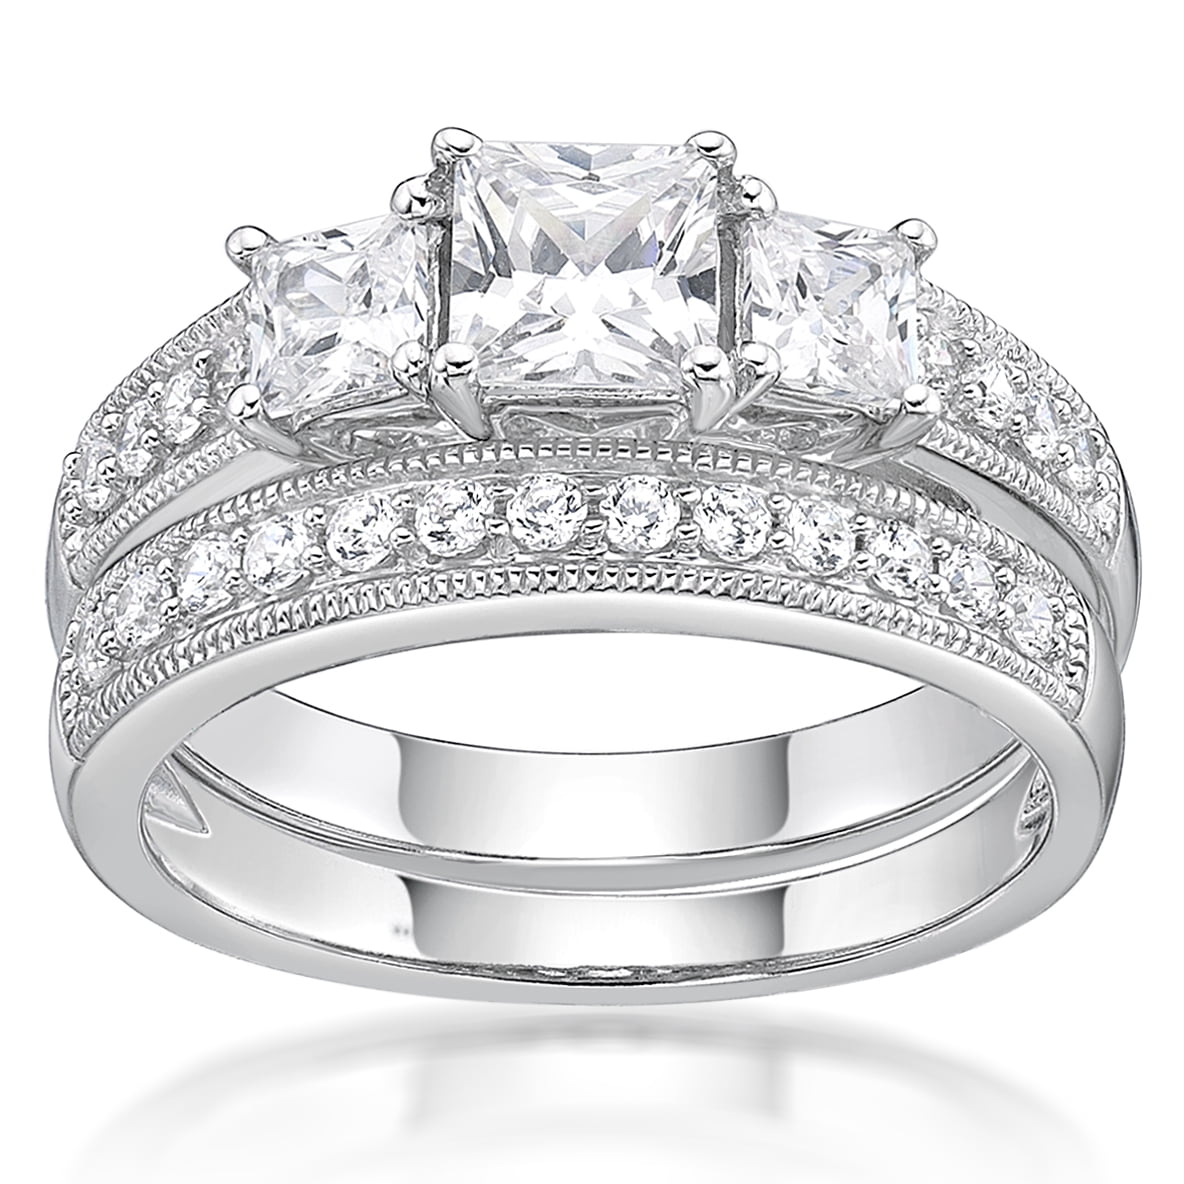 Details about   2.08 CT White Round Cut Diamond Bridal Wedding Ring Set In 925 Sterling Silver 